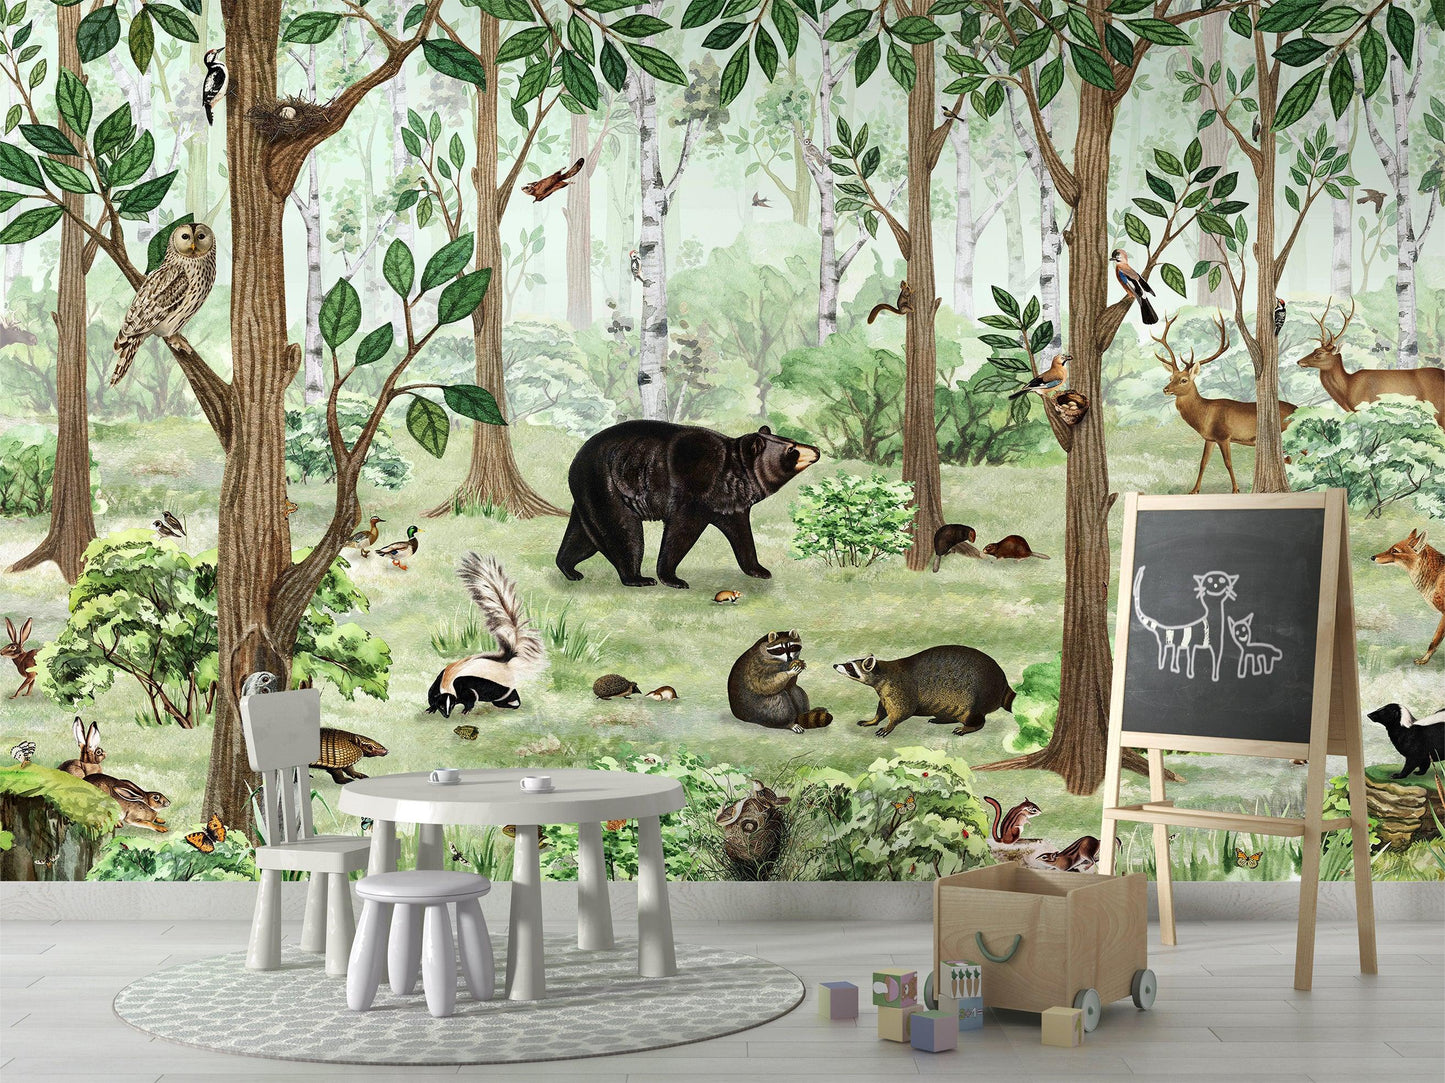 Forest Lookbook Wallpaper Mural - MAIA HOMES